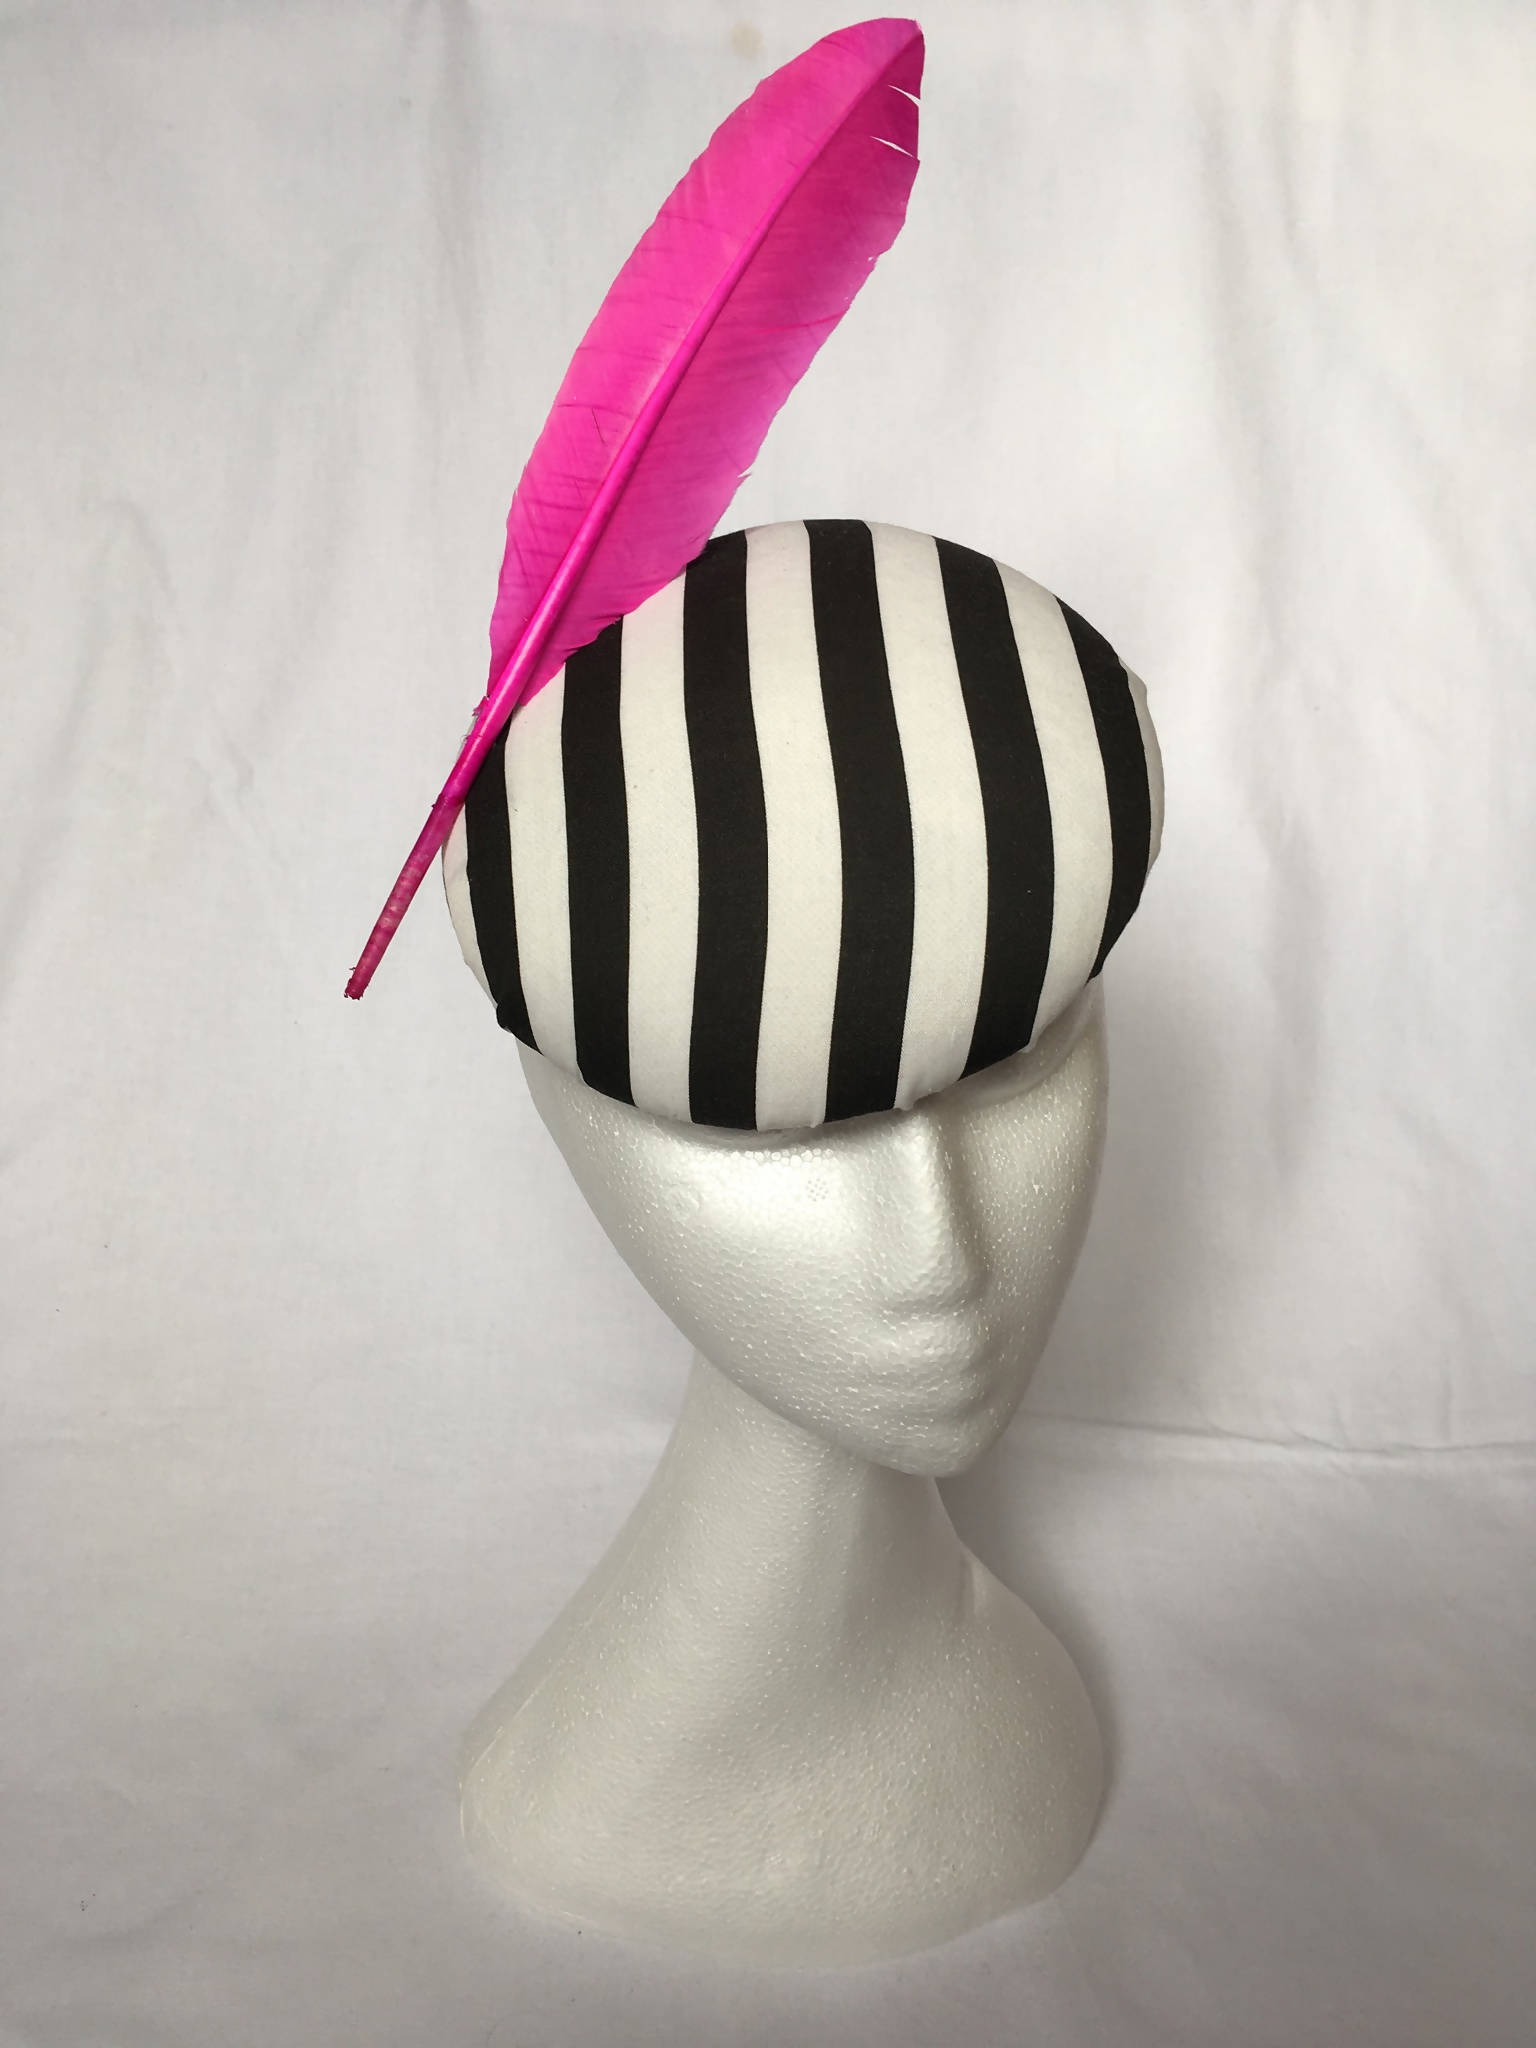 Black and white striped pillbox hat with pink feather detail (Pandora)